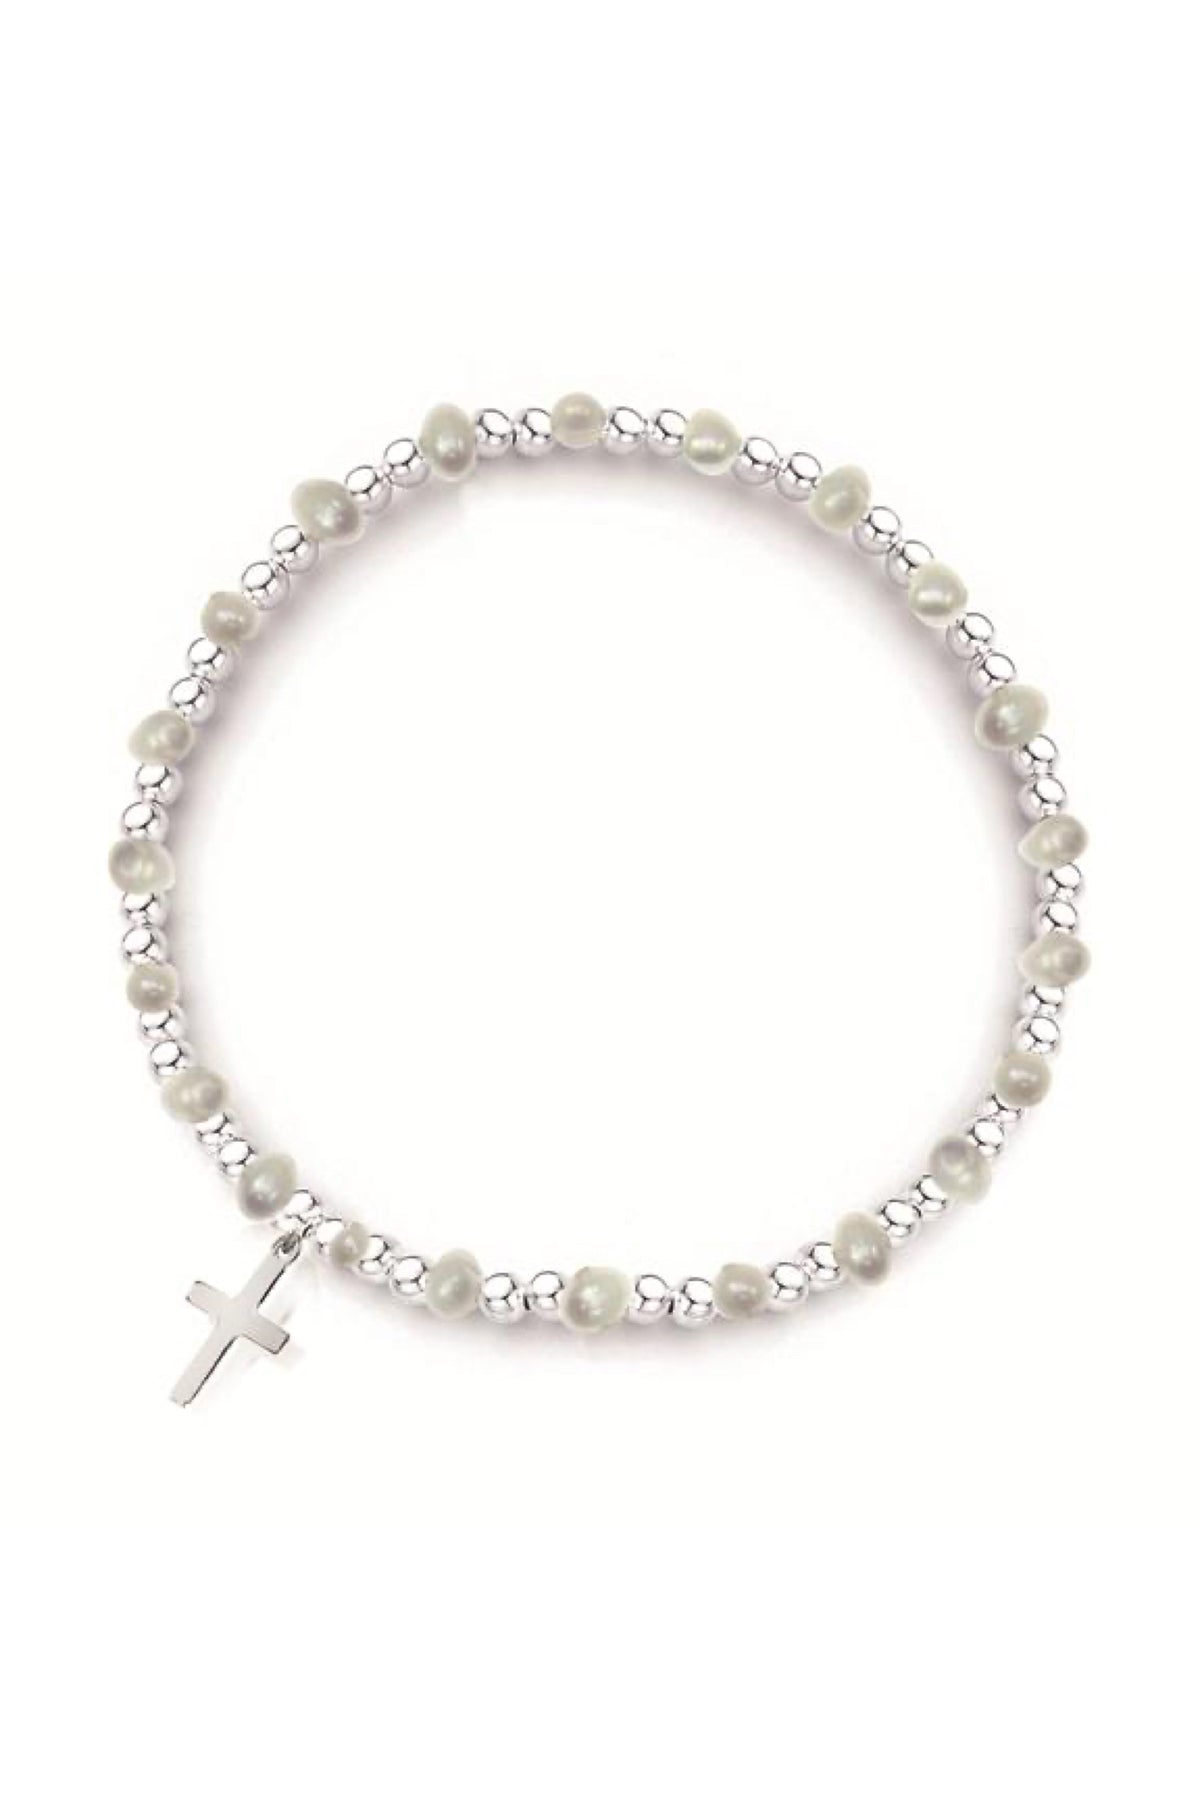 Pearl Coll SS Elastic Ball Bracelet With Freshwater Pearls Cross